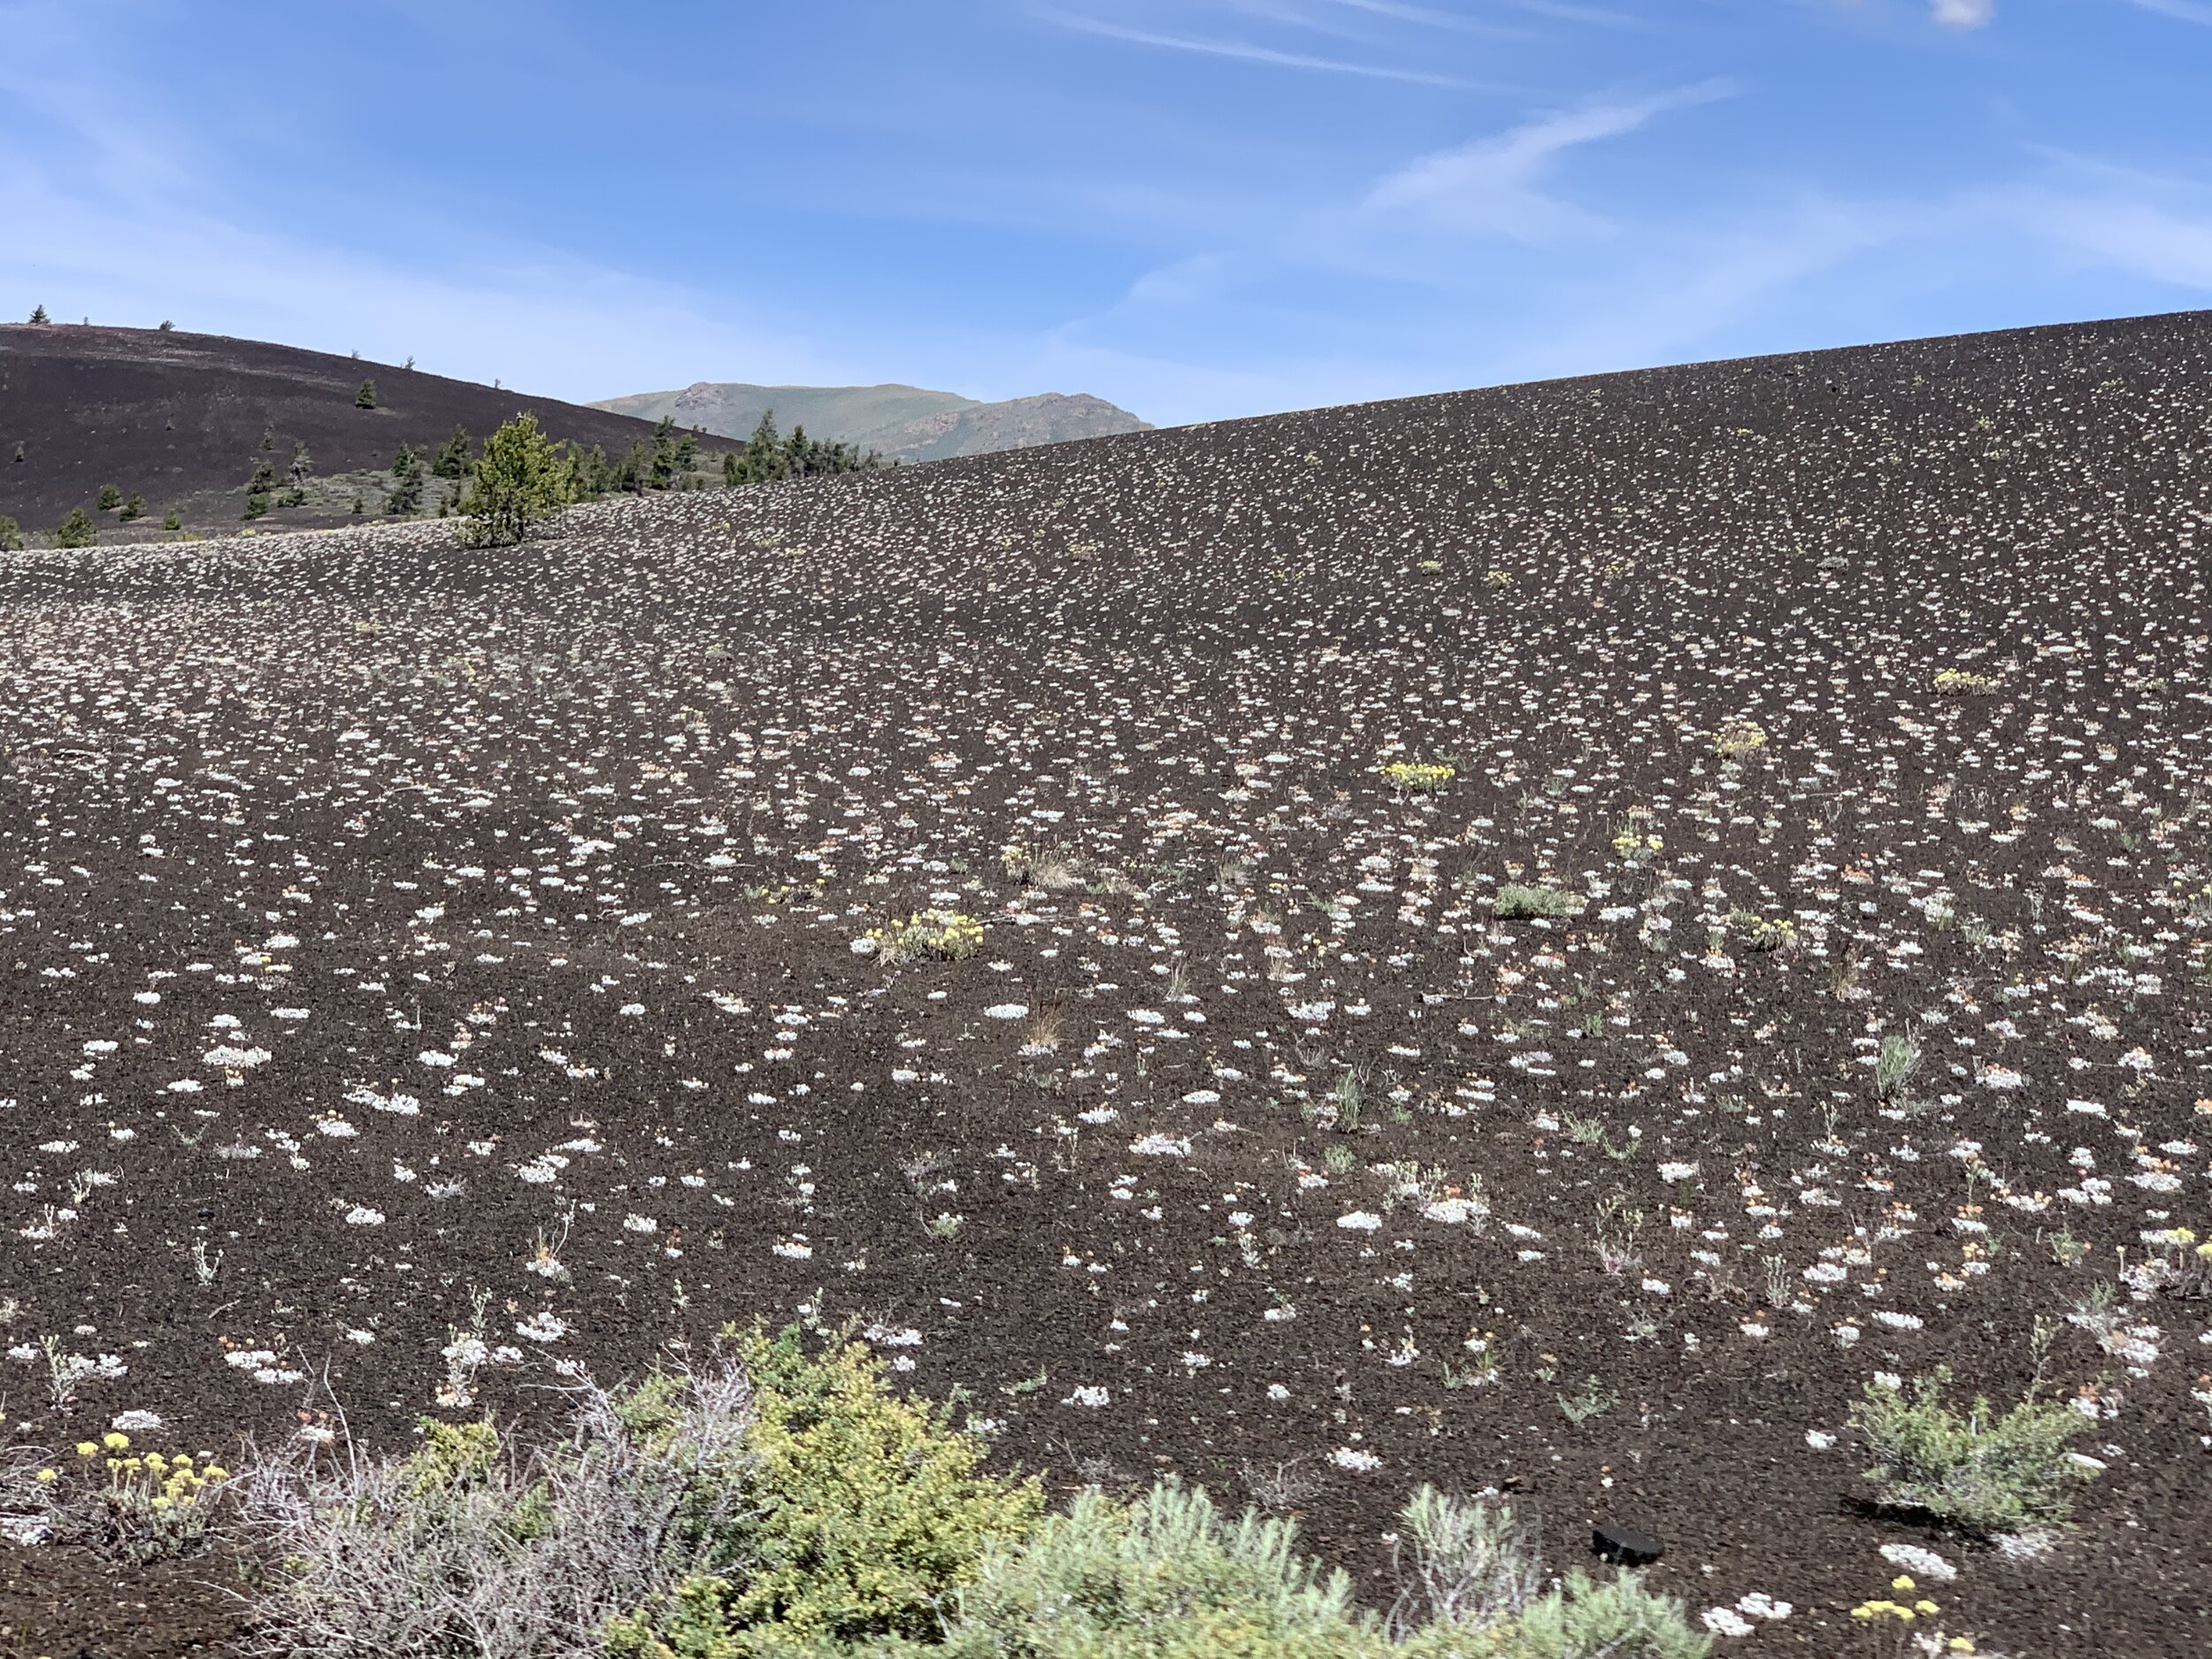  Surprisingly, there are thousands of various plants that live in the lava.  The white spots here are shoots of Drawf Buckwheat, a delicate, adorable plant when viewed up closely.  